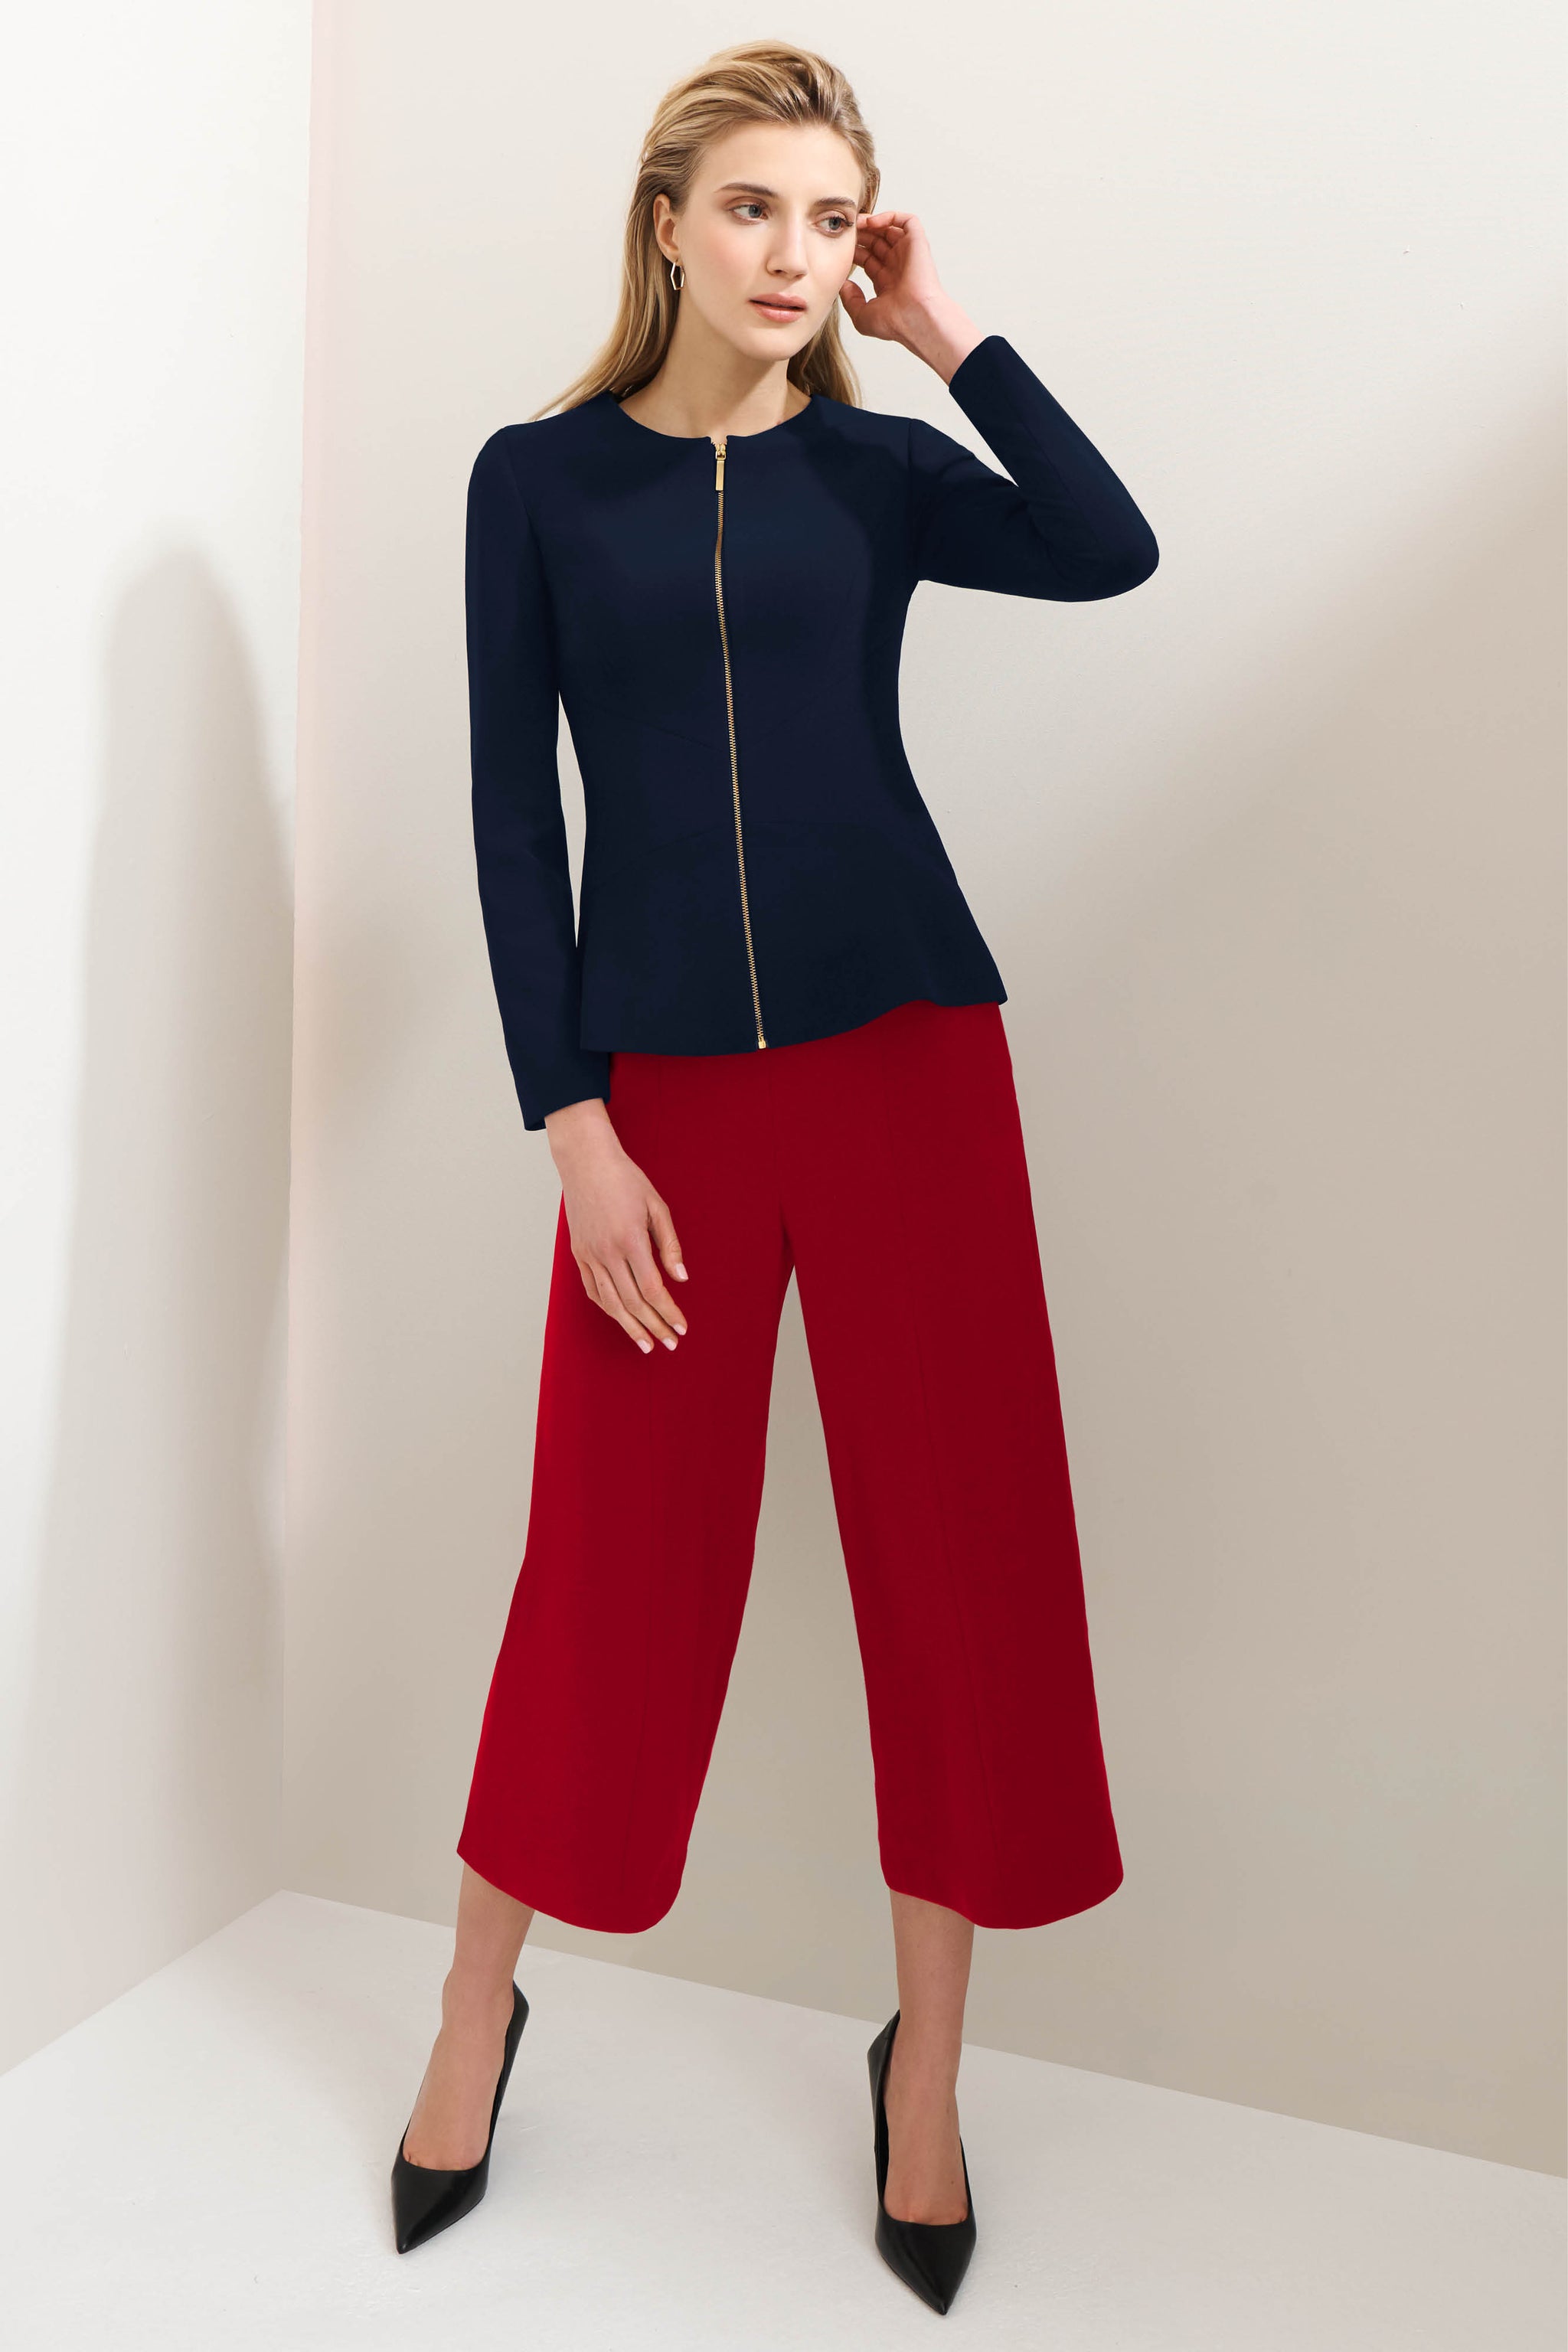 Kendle Bright Red Culottes